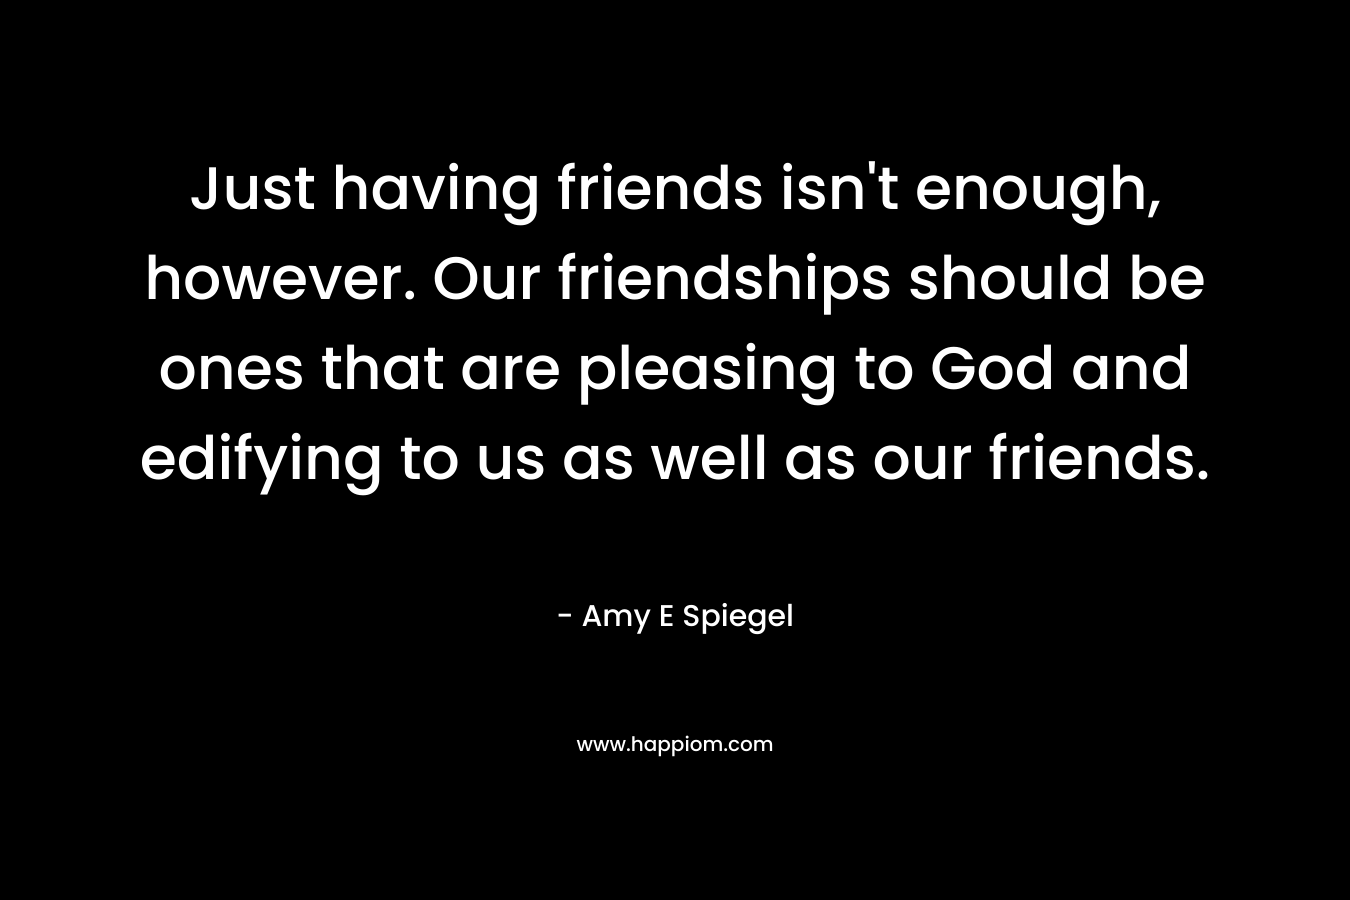 Just having friends isn’t enough, however. Our friendships should be ones that are pleasing to God and edifying to us as well as our friends. – Amy E Spiegel